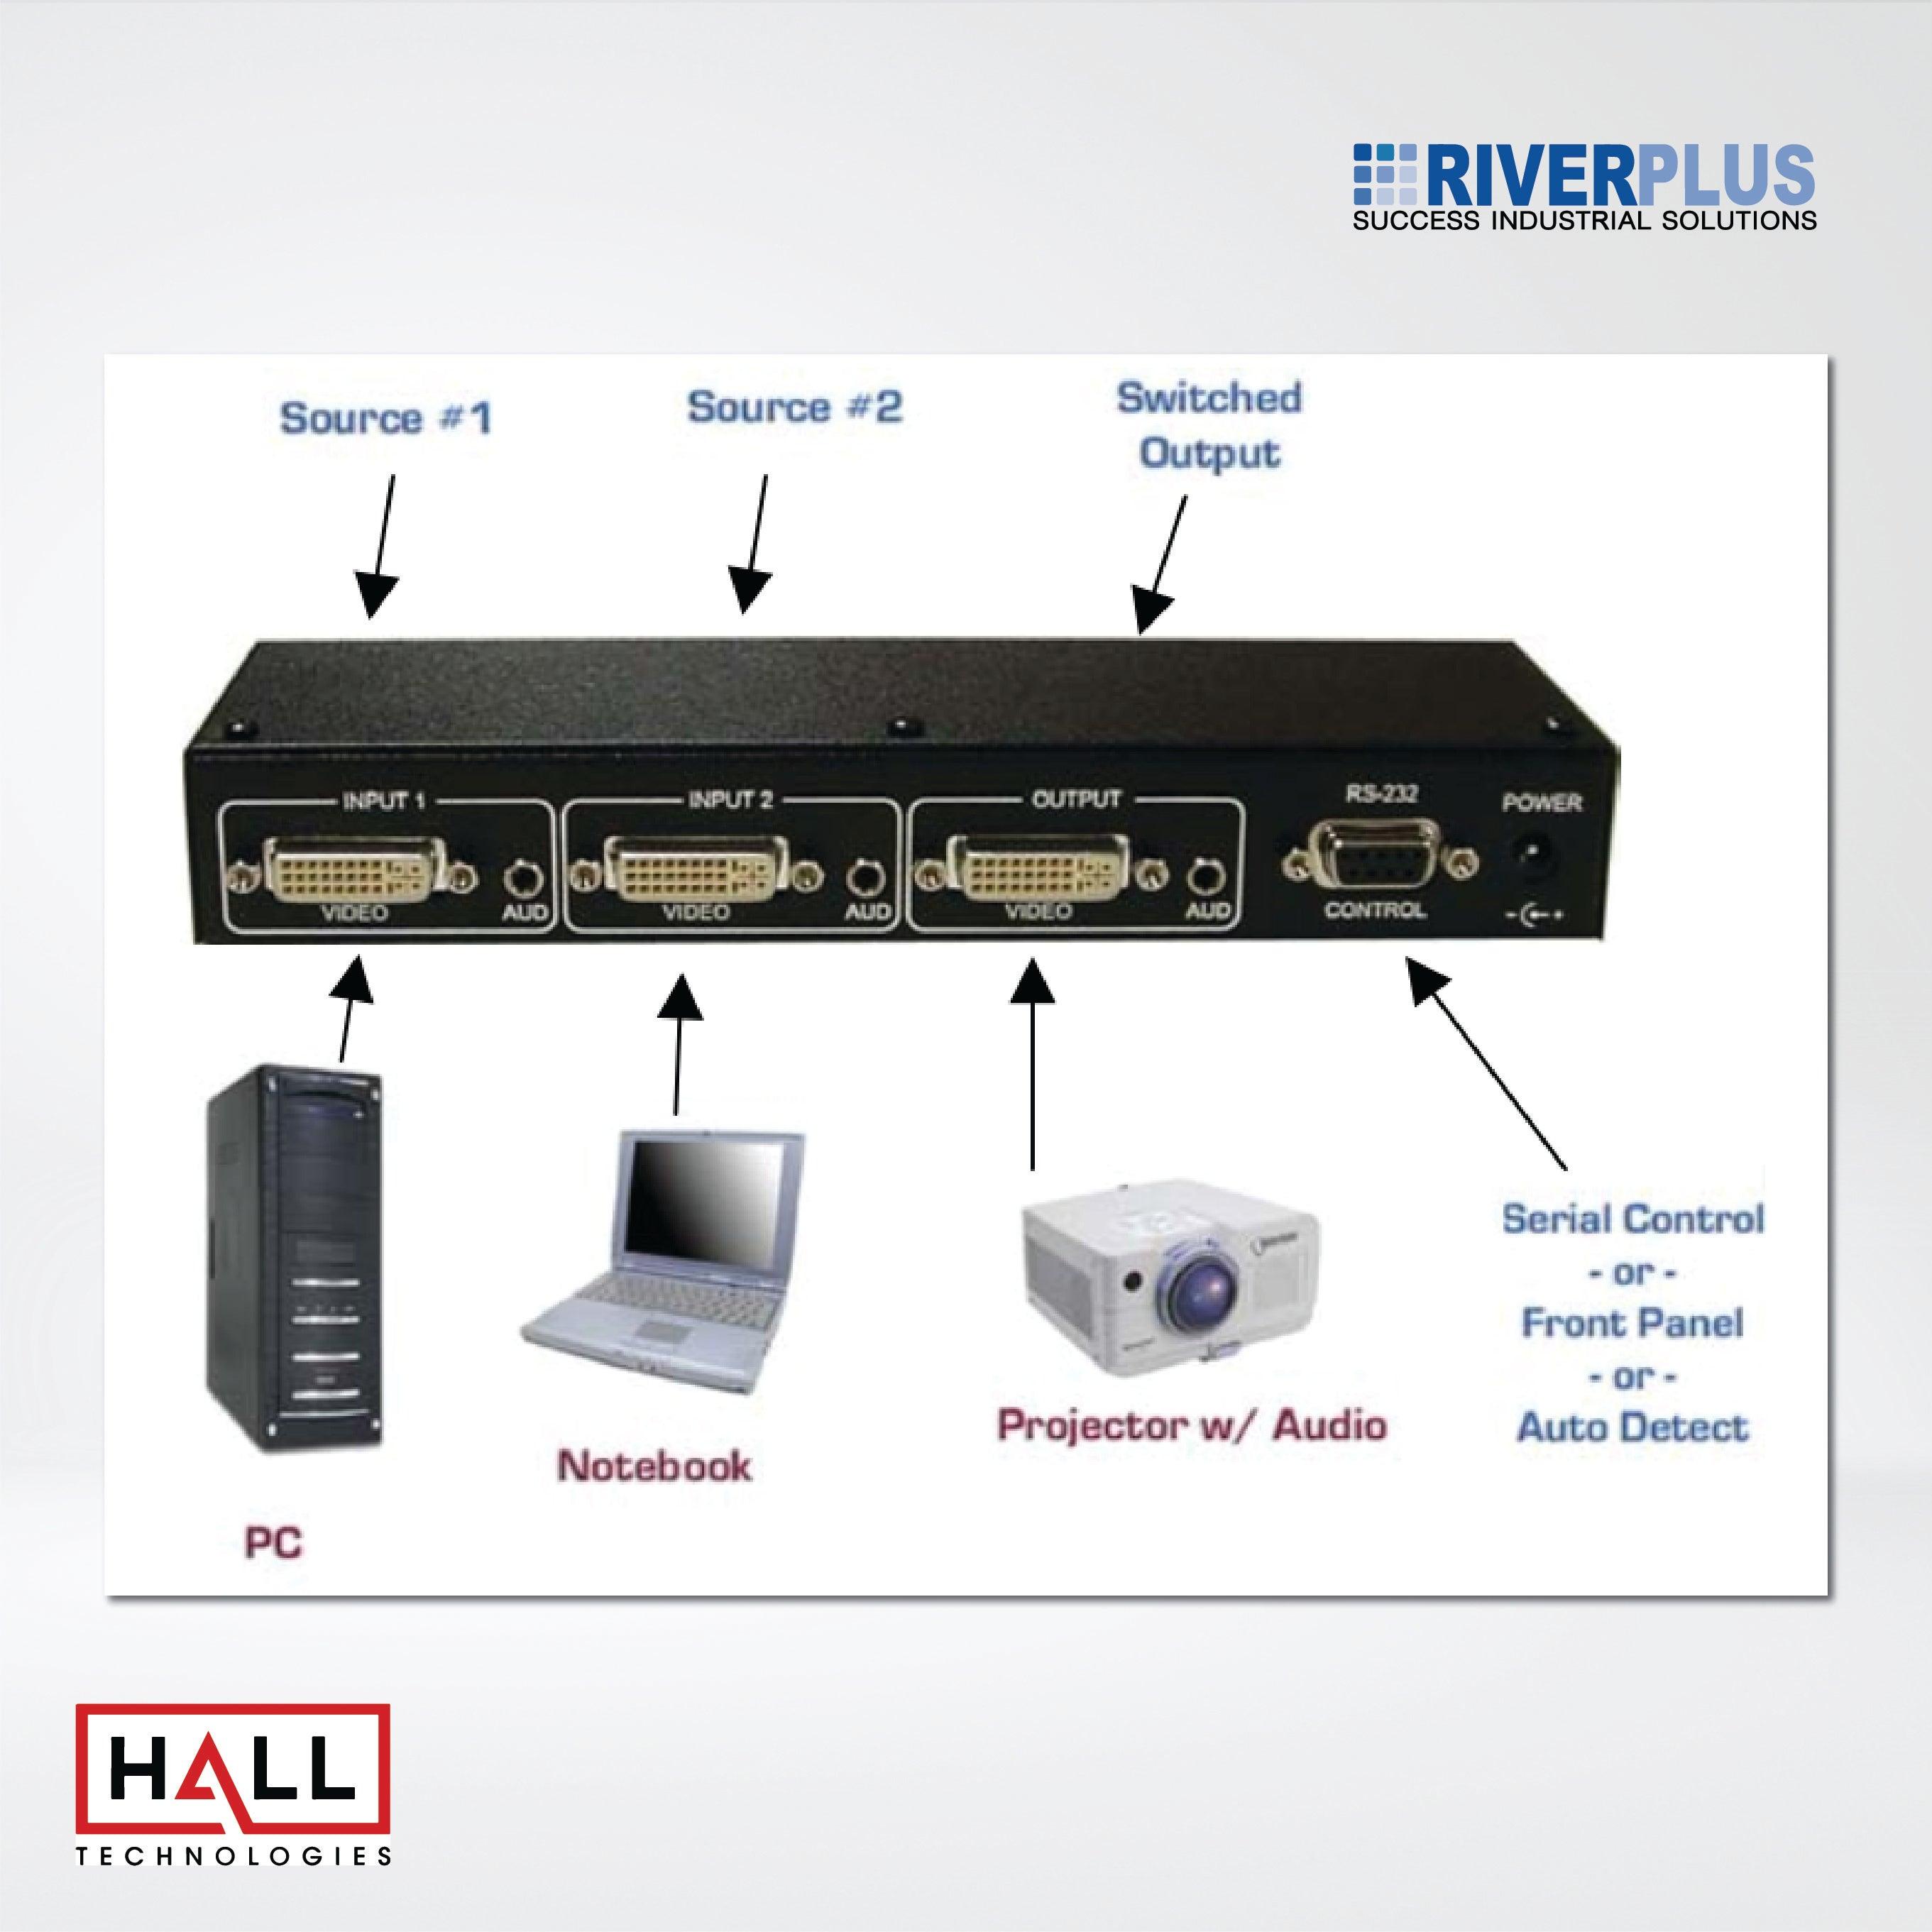 DVS-2A 2x1 DVI Switch with Audio, Serial Control & Long Cable Equalization - Riverplus